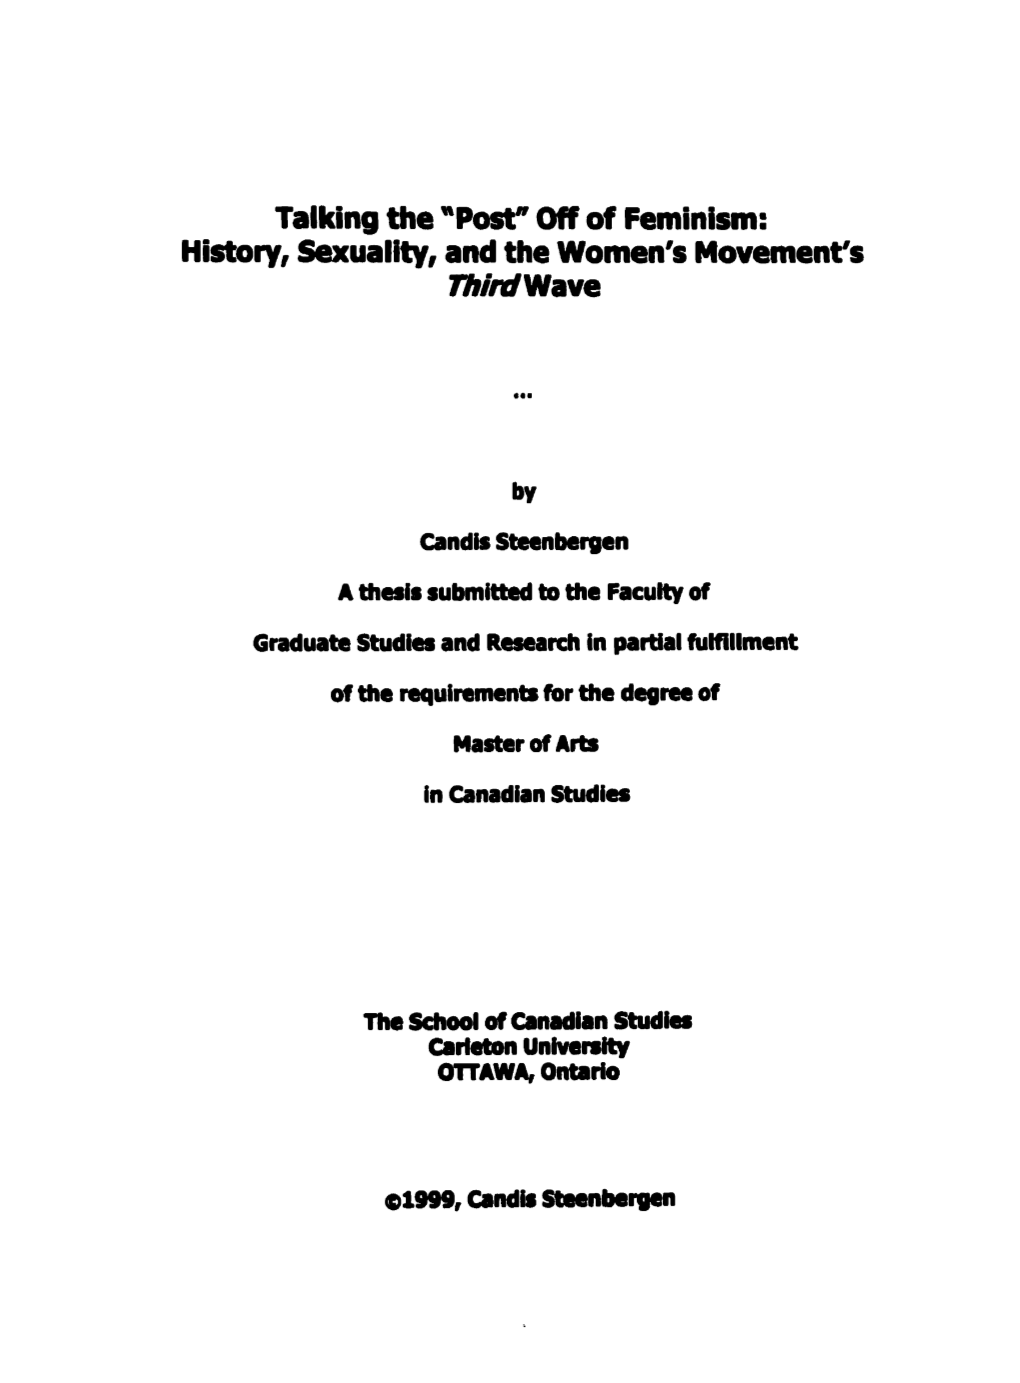 Talking the "Pest" Ûff of Feminism: History, Sexuality, and the Women9smovement's Mini Wave